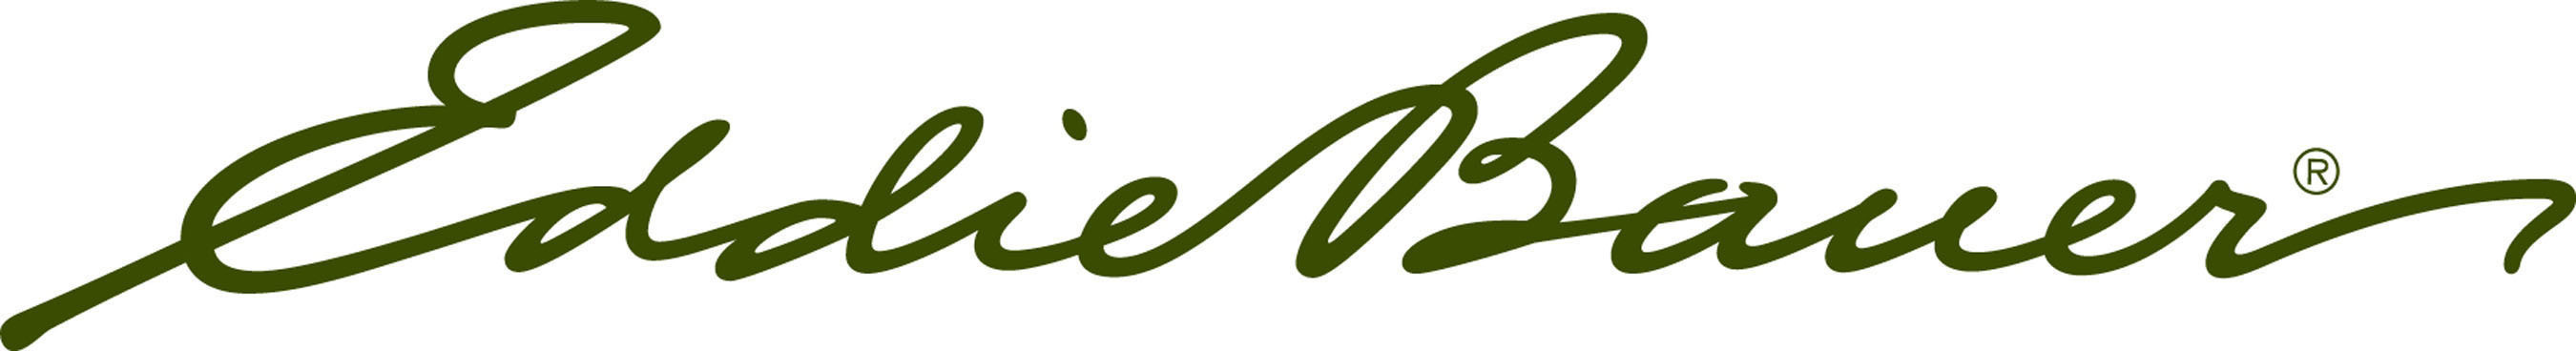 Eddie Bauer Announces New Chief Operating Officer and Chief ...